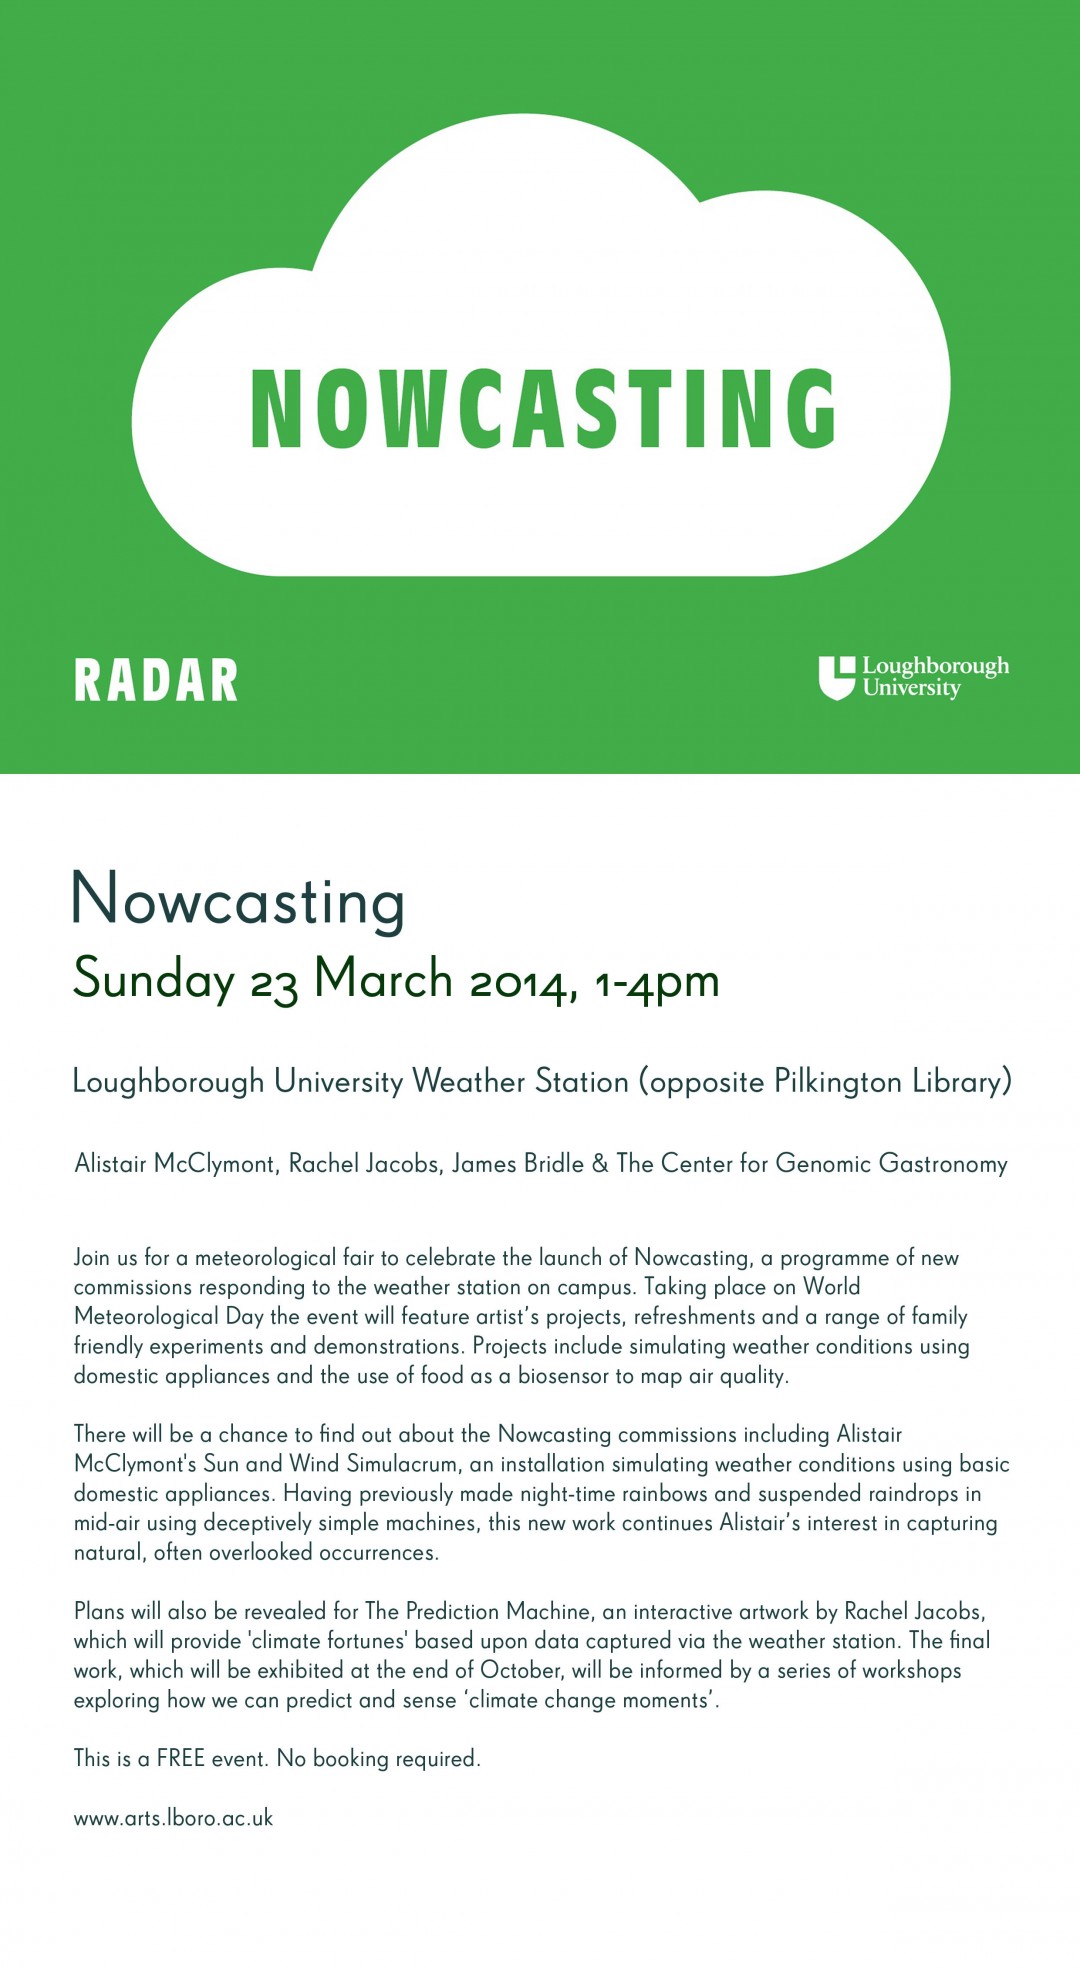 Nowcasting Launch - Sunday 23rd March